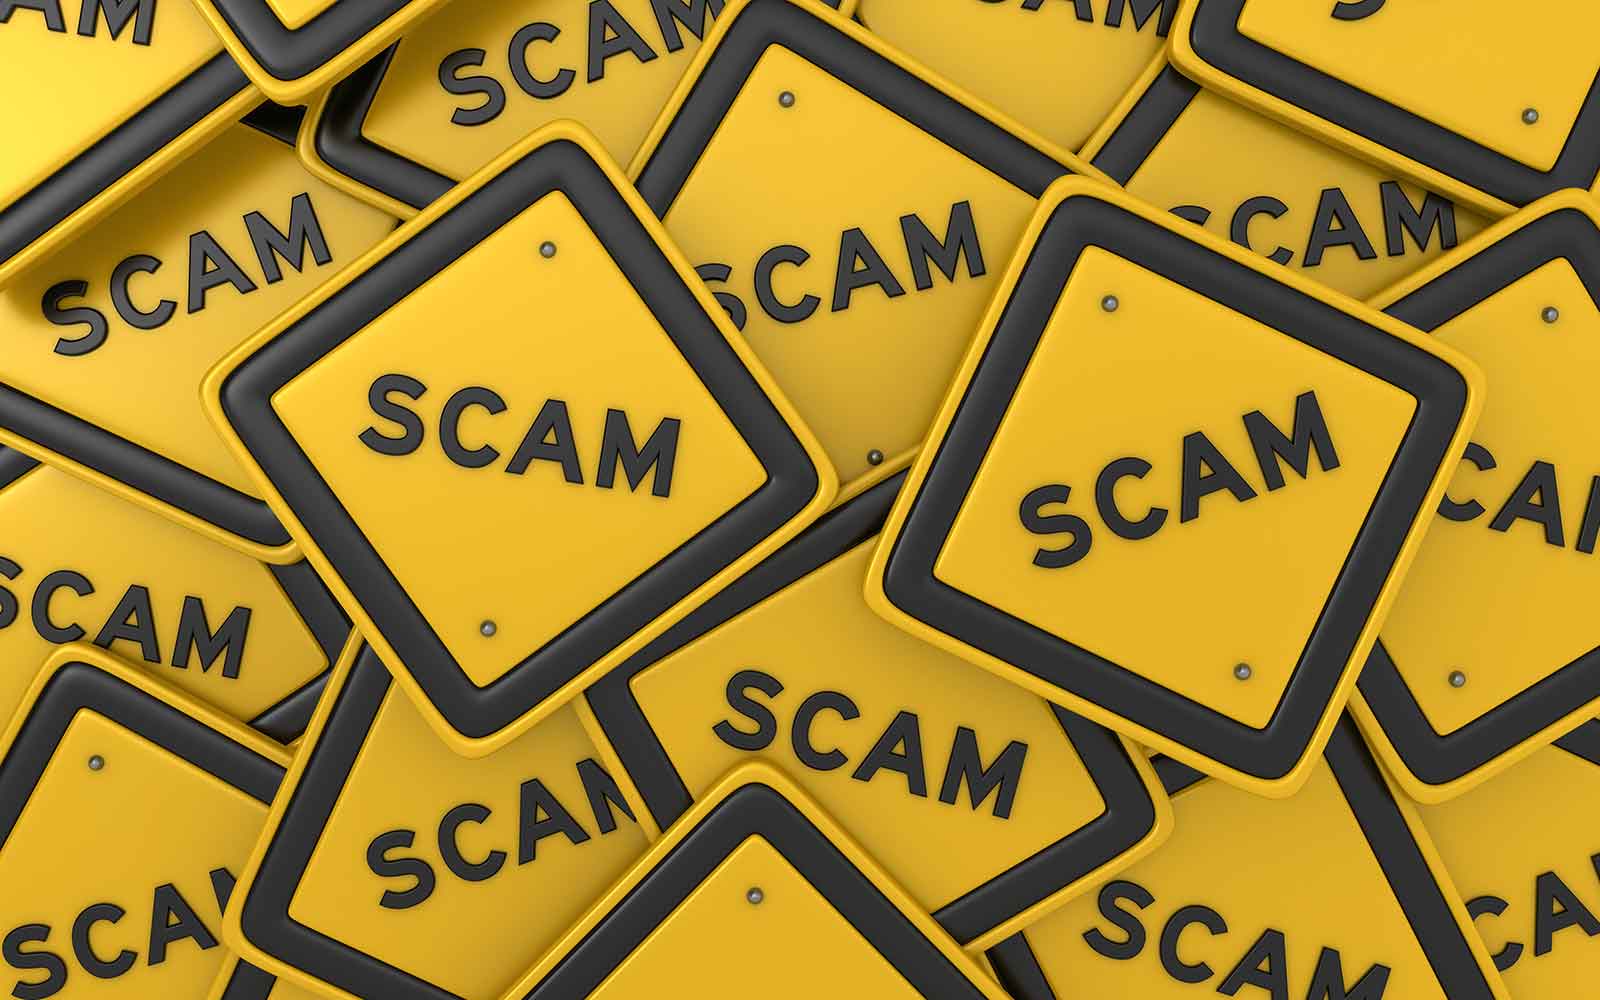 Beware of phone, mail scams, officials warn – Times-Standard